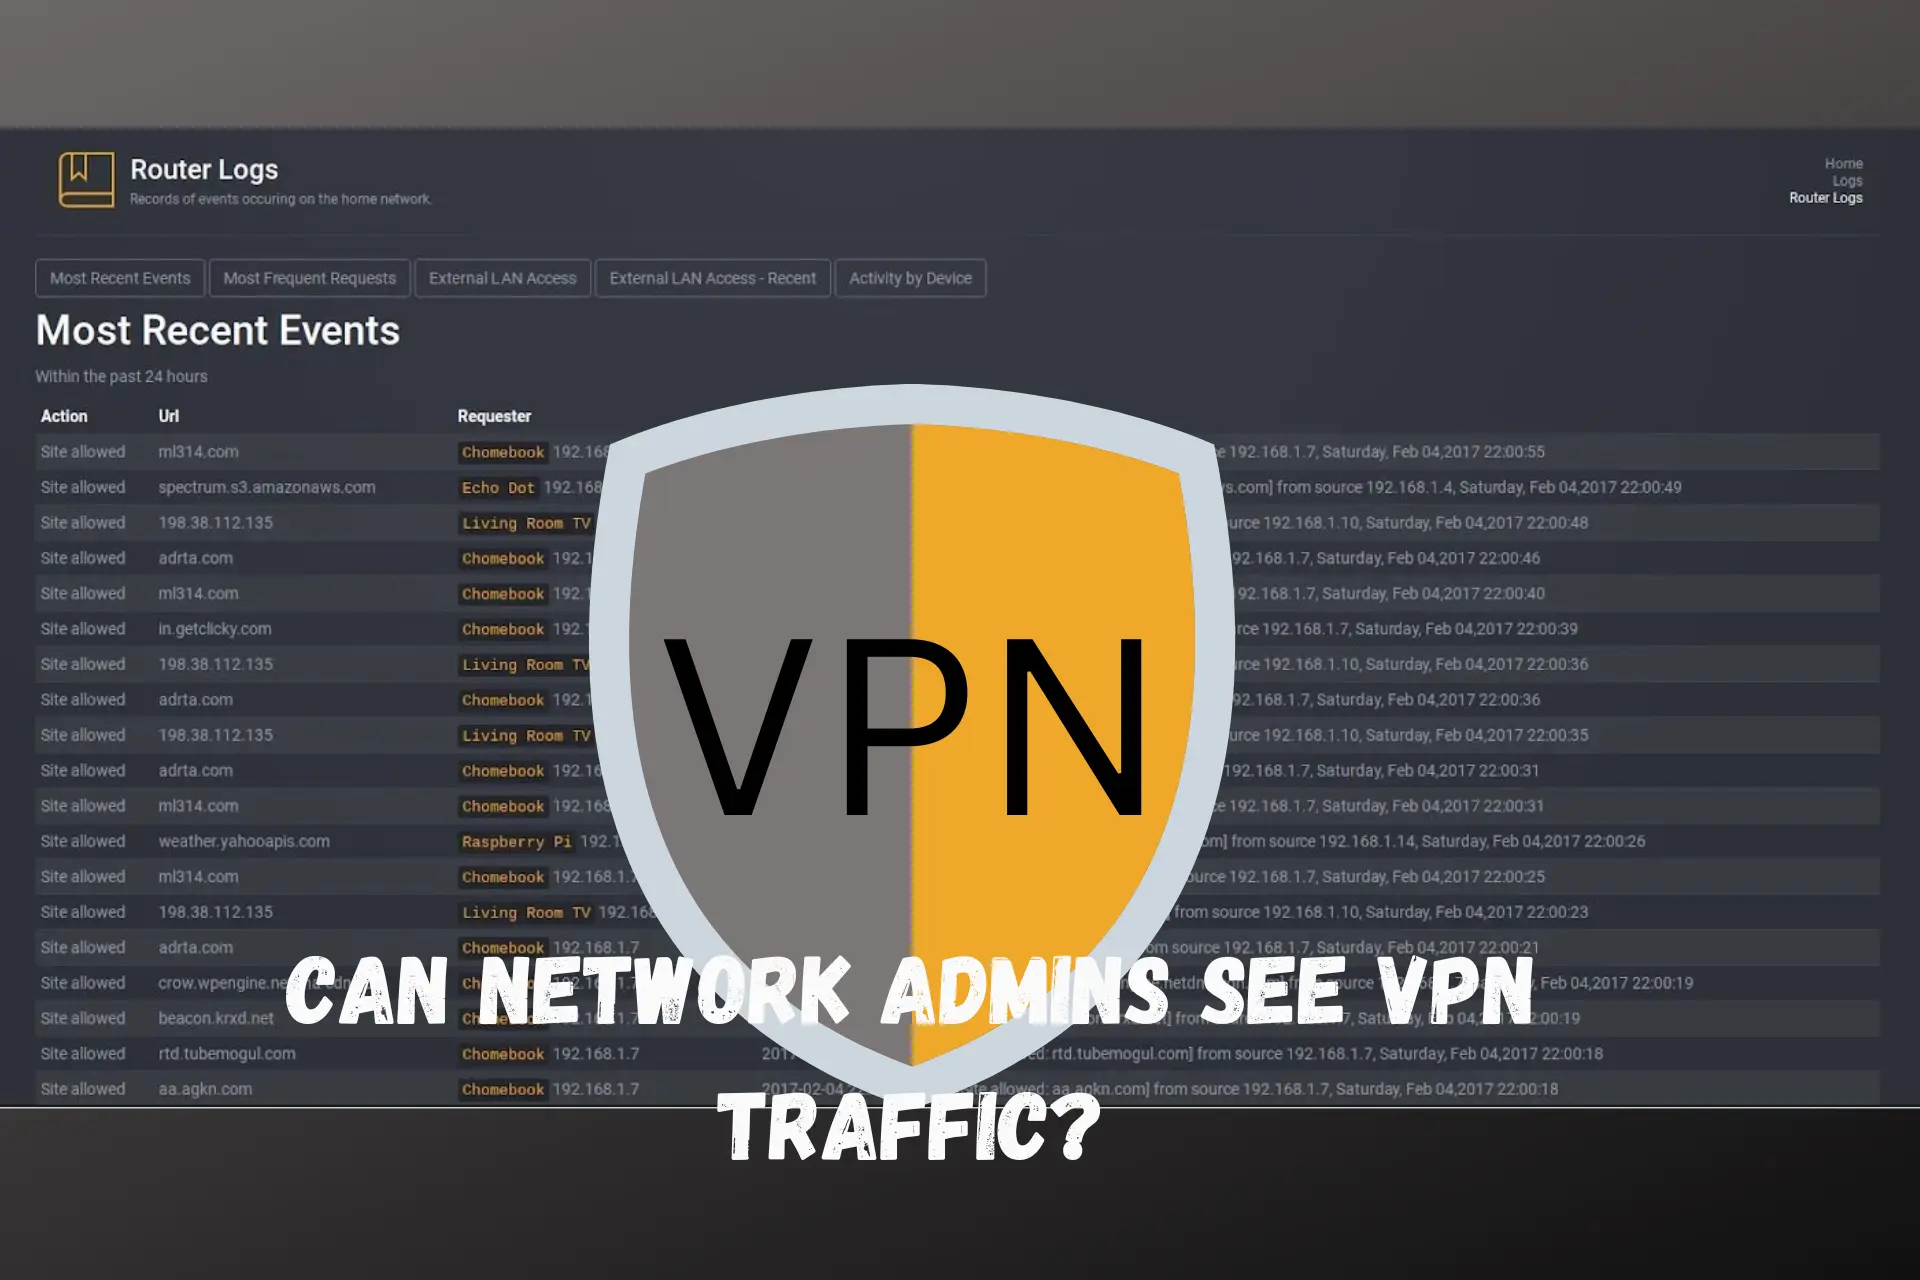 can network admin see vpn traffic